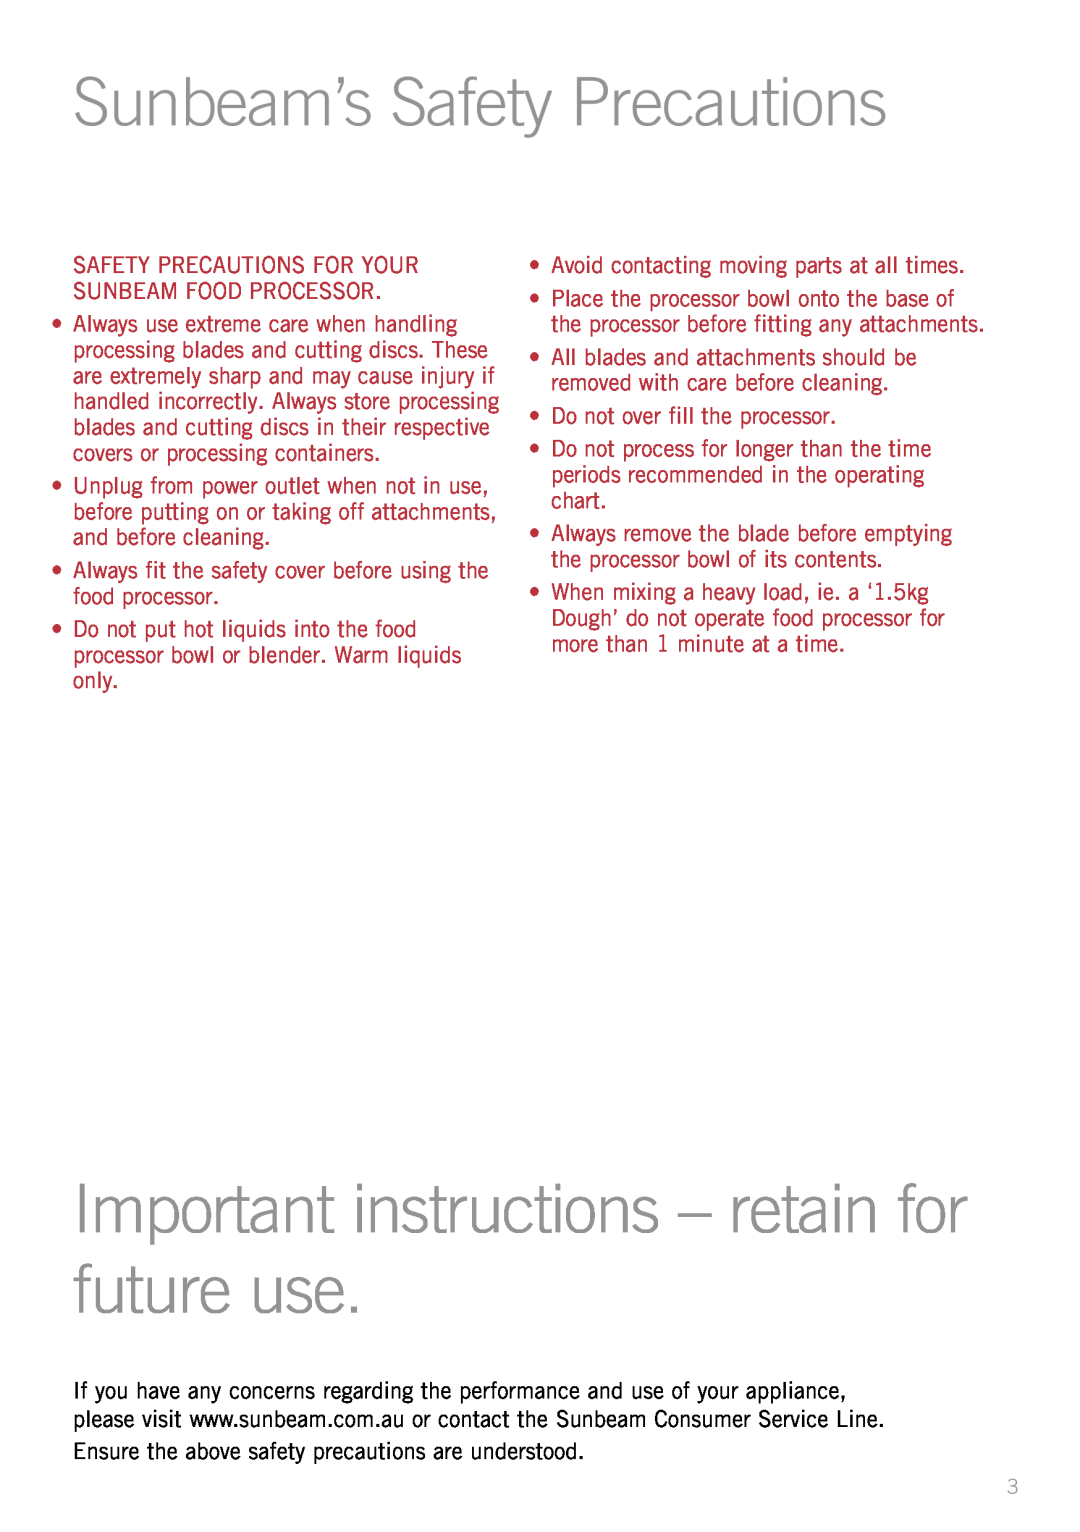 Sunbeam LC6200 manual Important instructions - retain for future use, Sunbeam’s Safety Precautions 